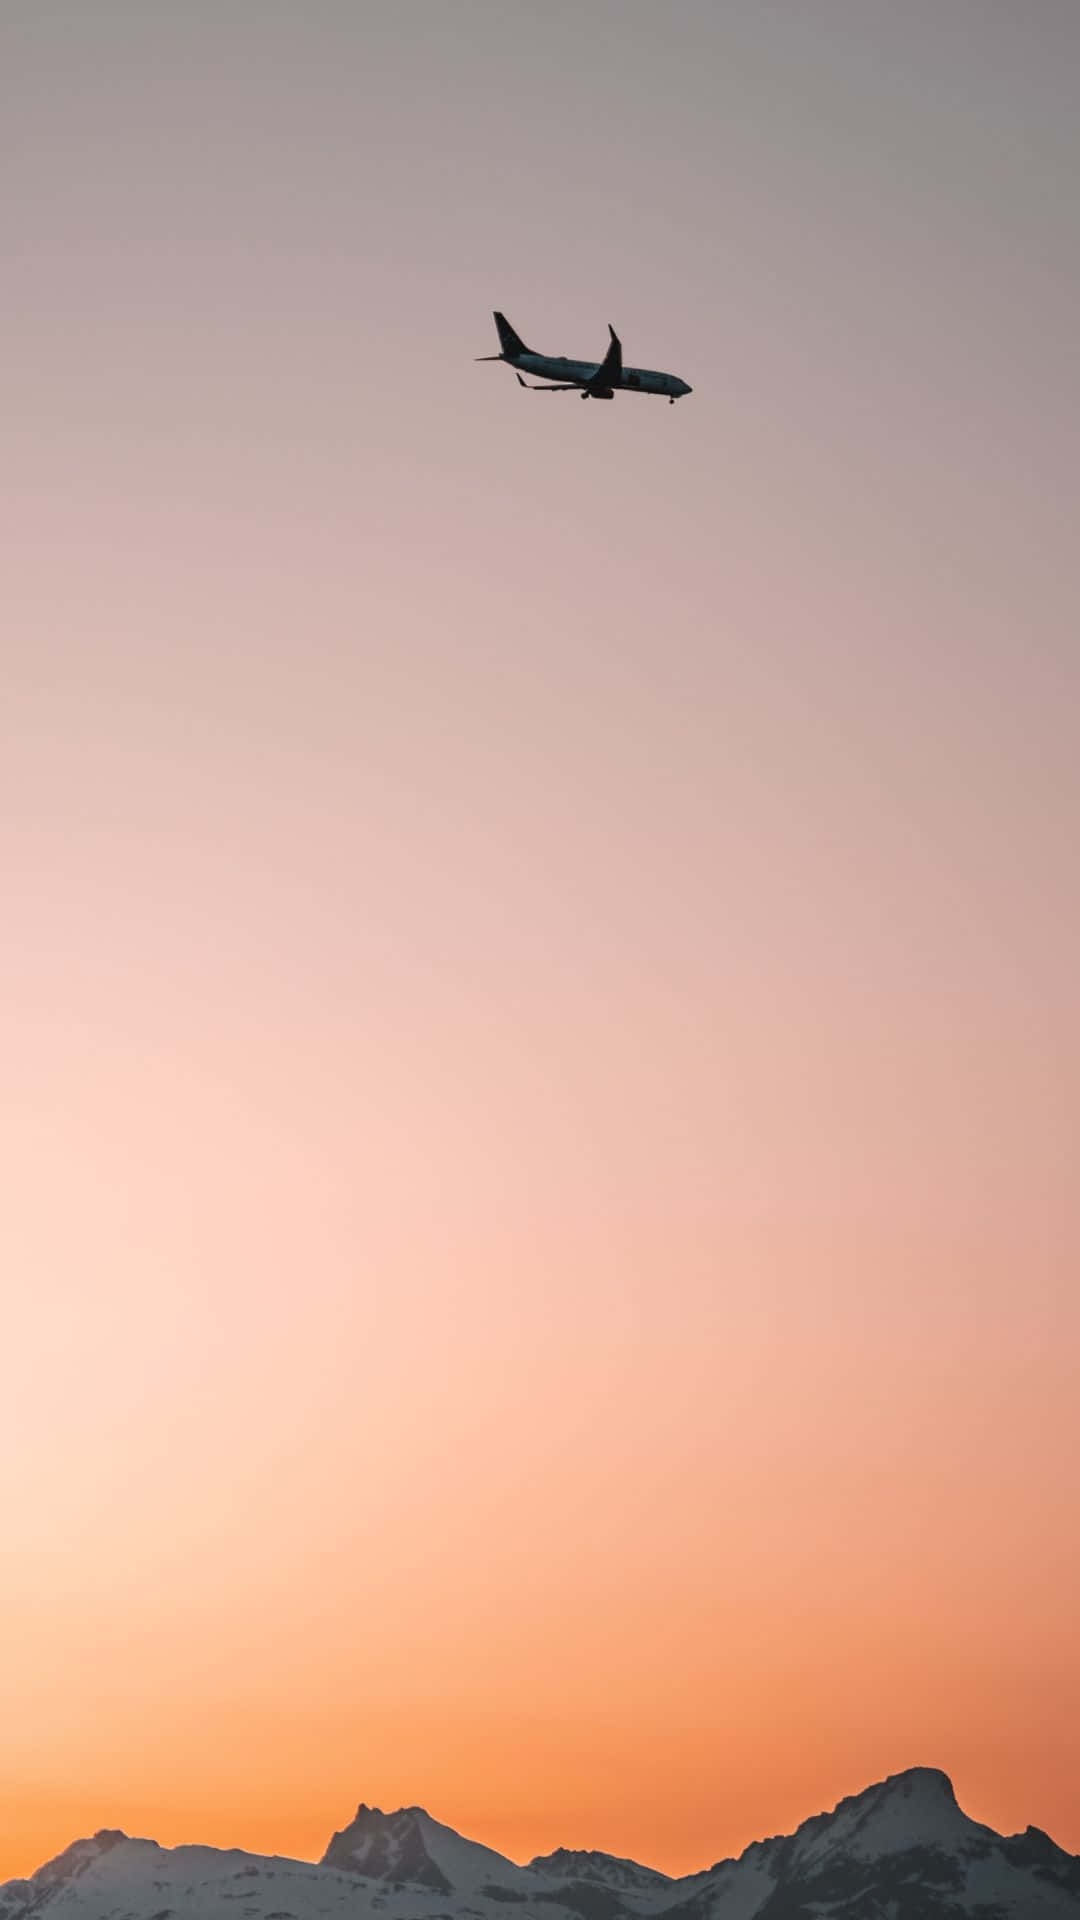 Airplane In The Sunset Sky Portrait Background